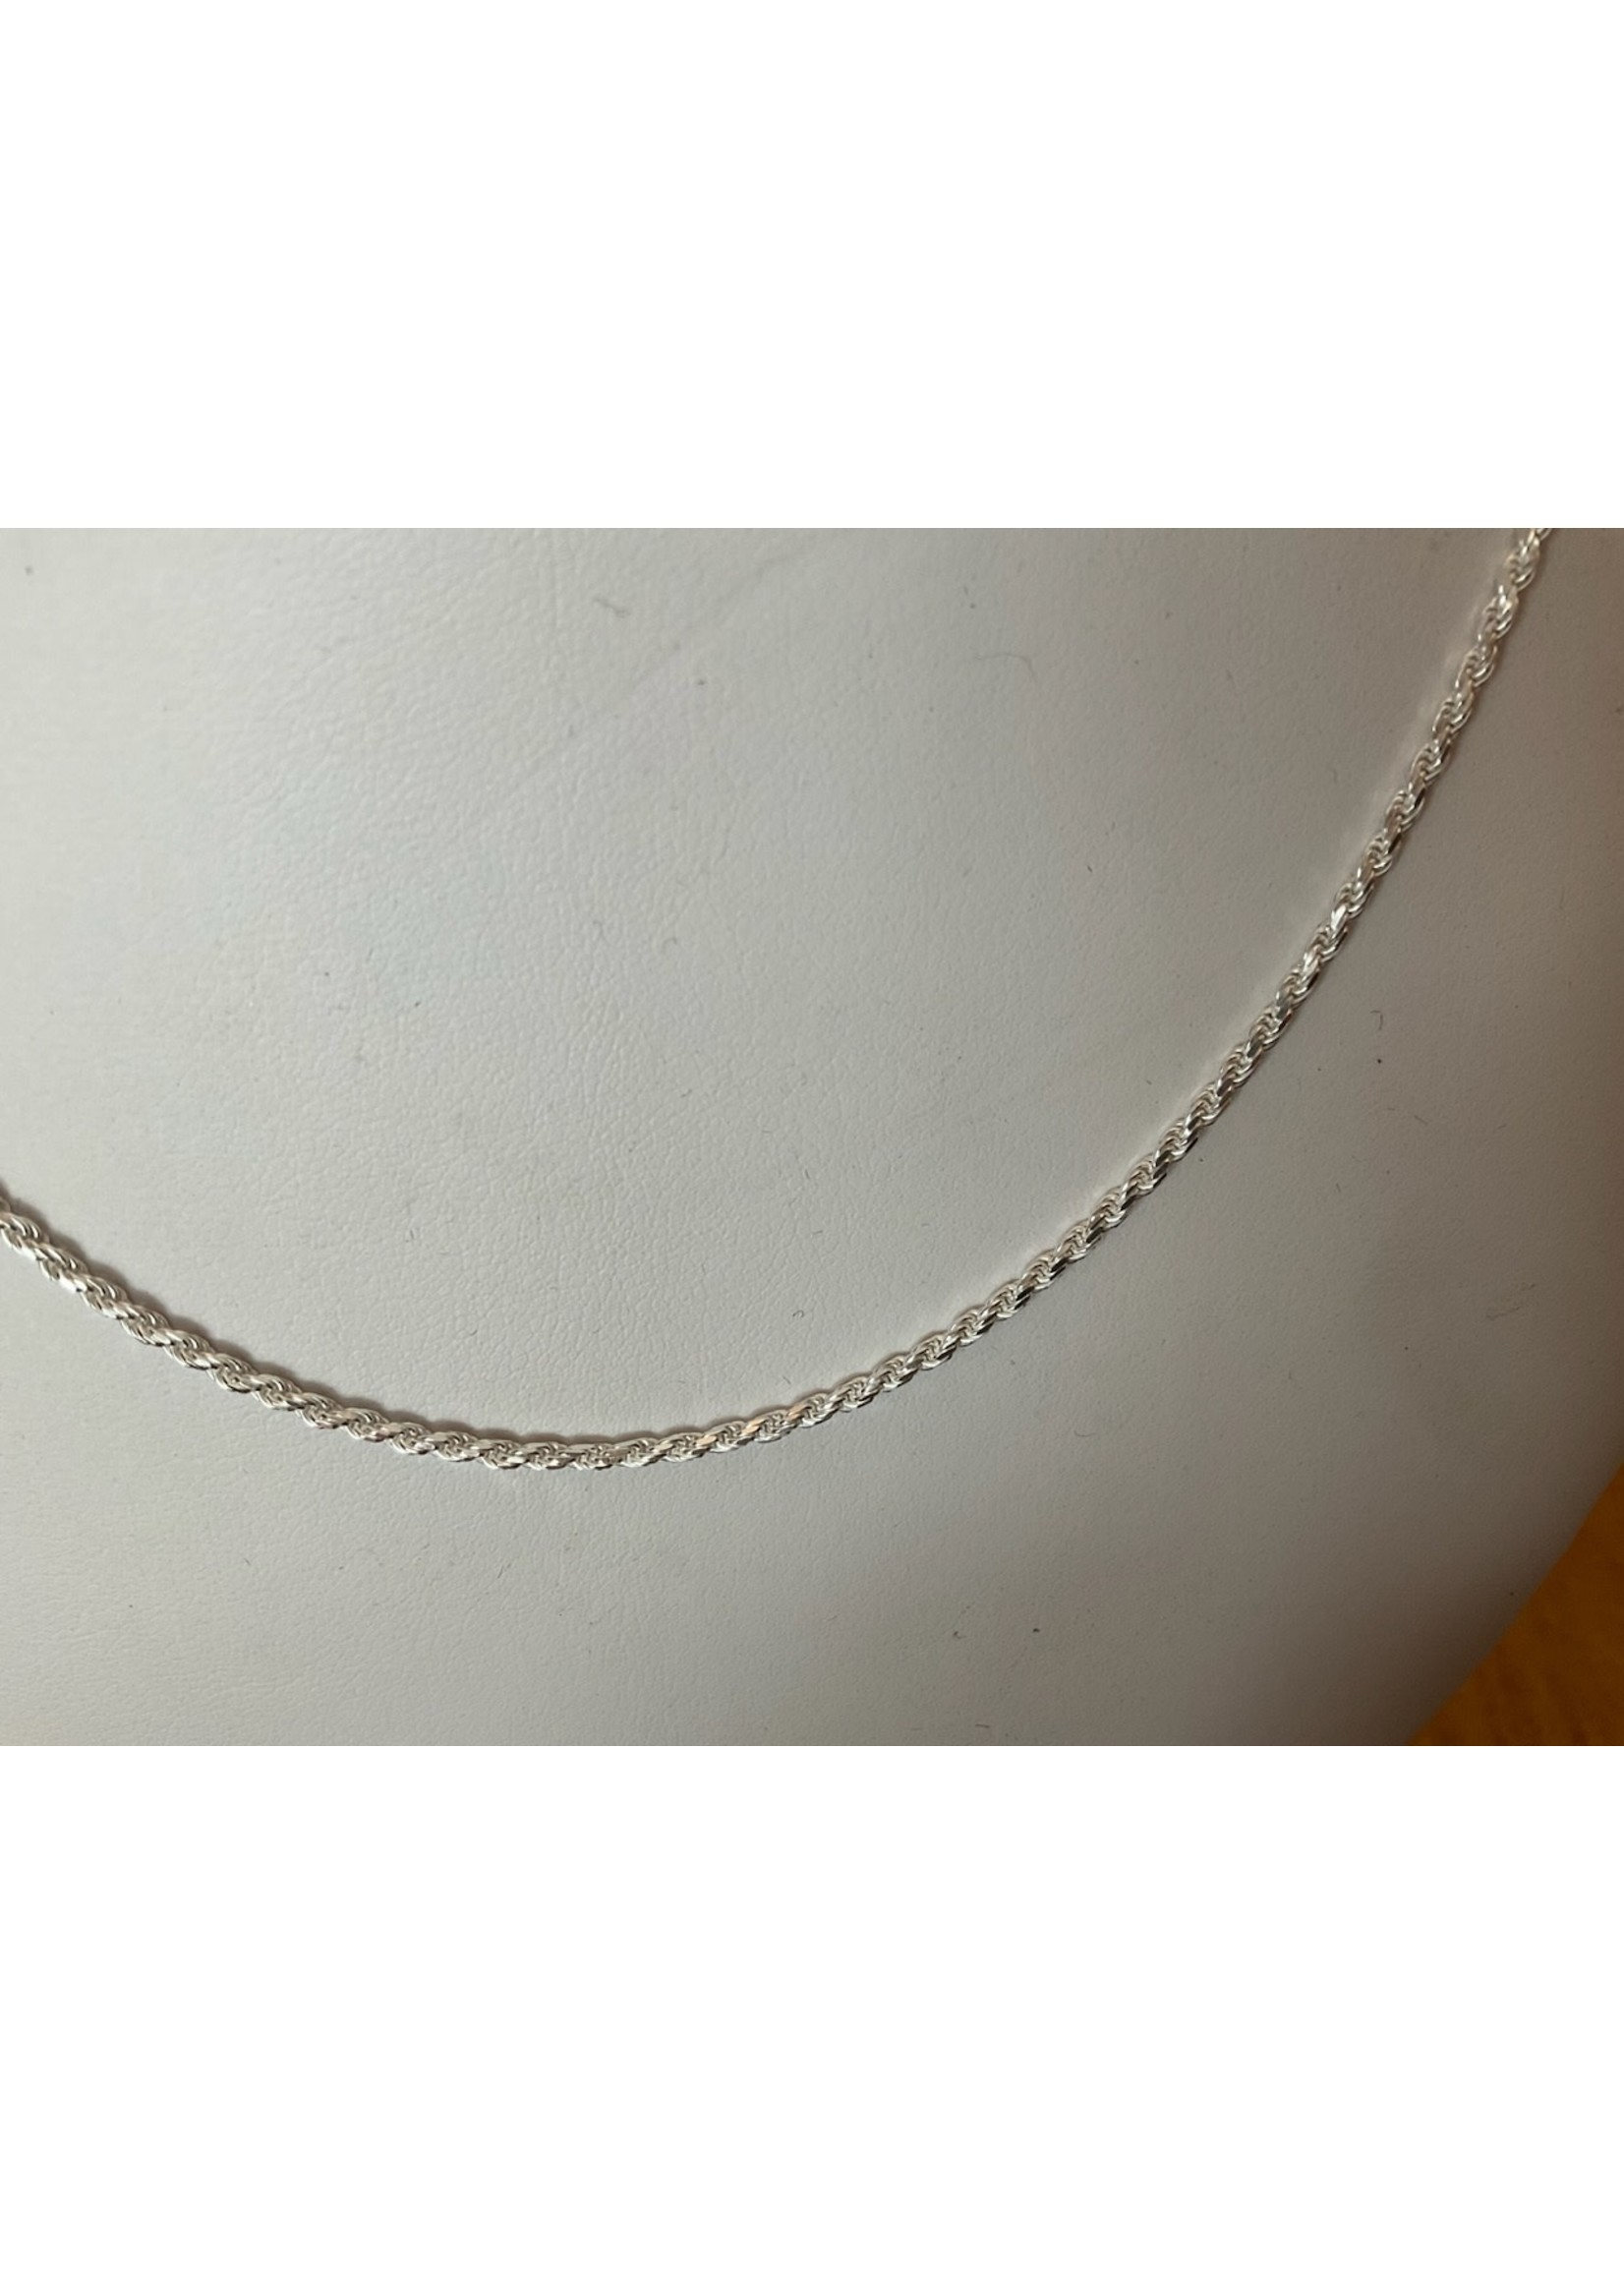 Rope Chain - Sterling Silver with Lobster Clasp - 24”